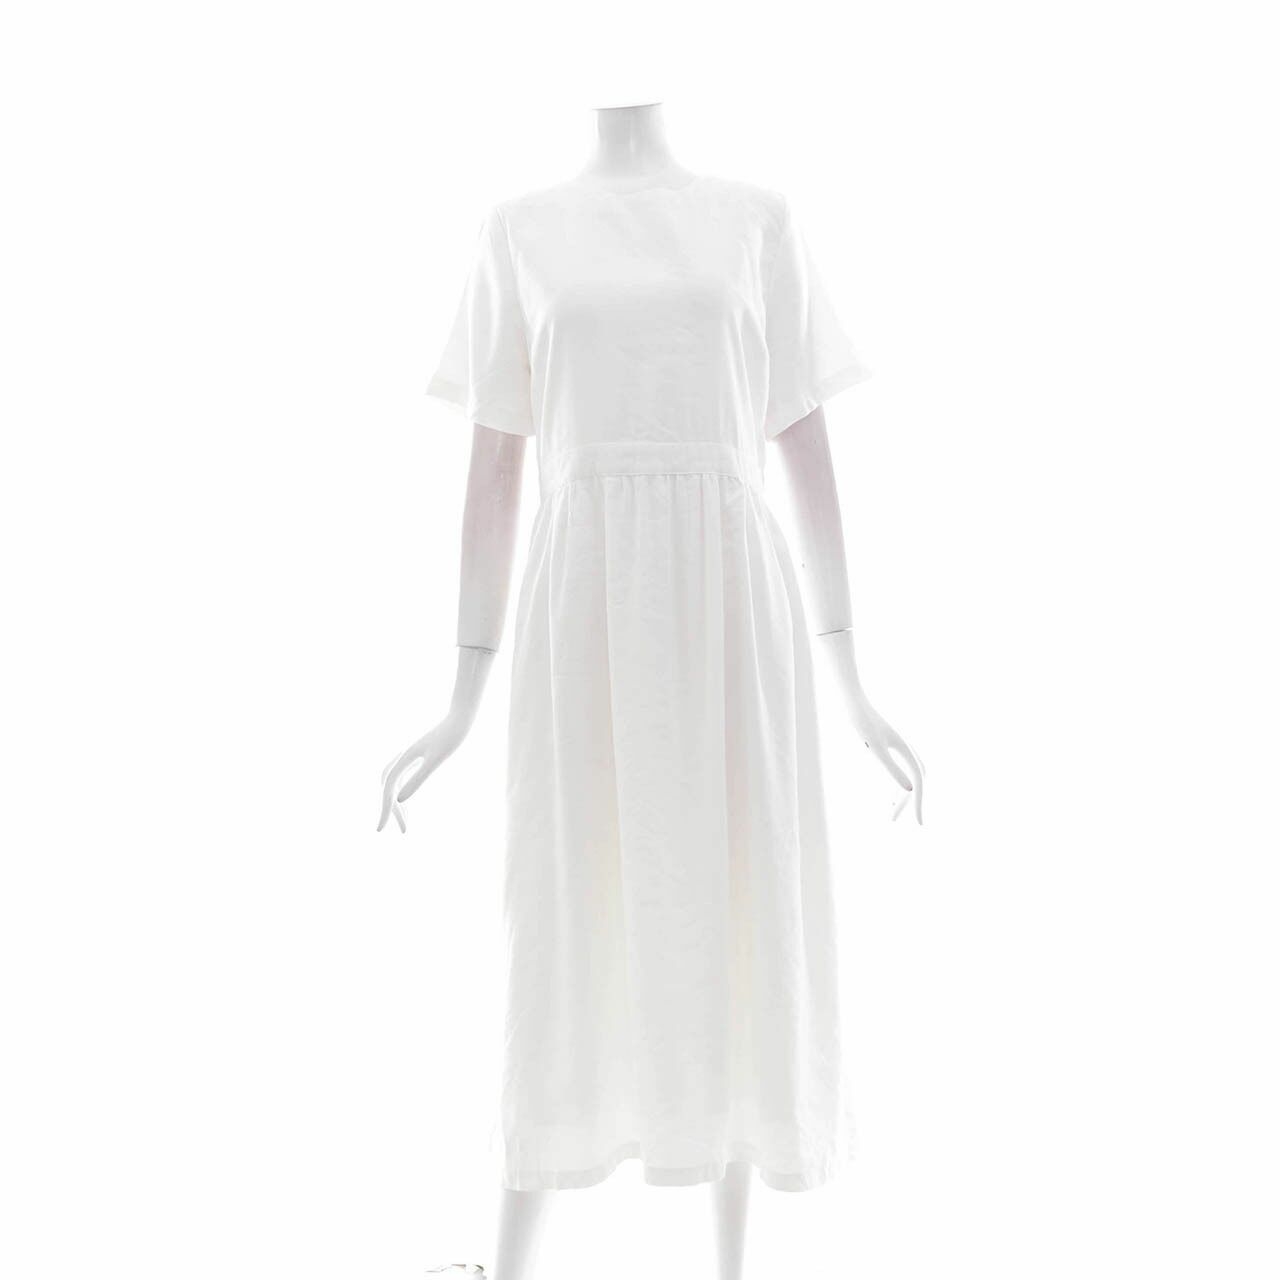 The Editor's Market Off White Back Cut Out Midi Dress